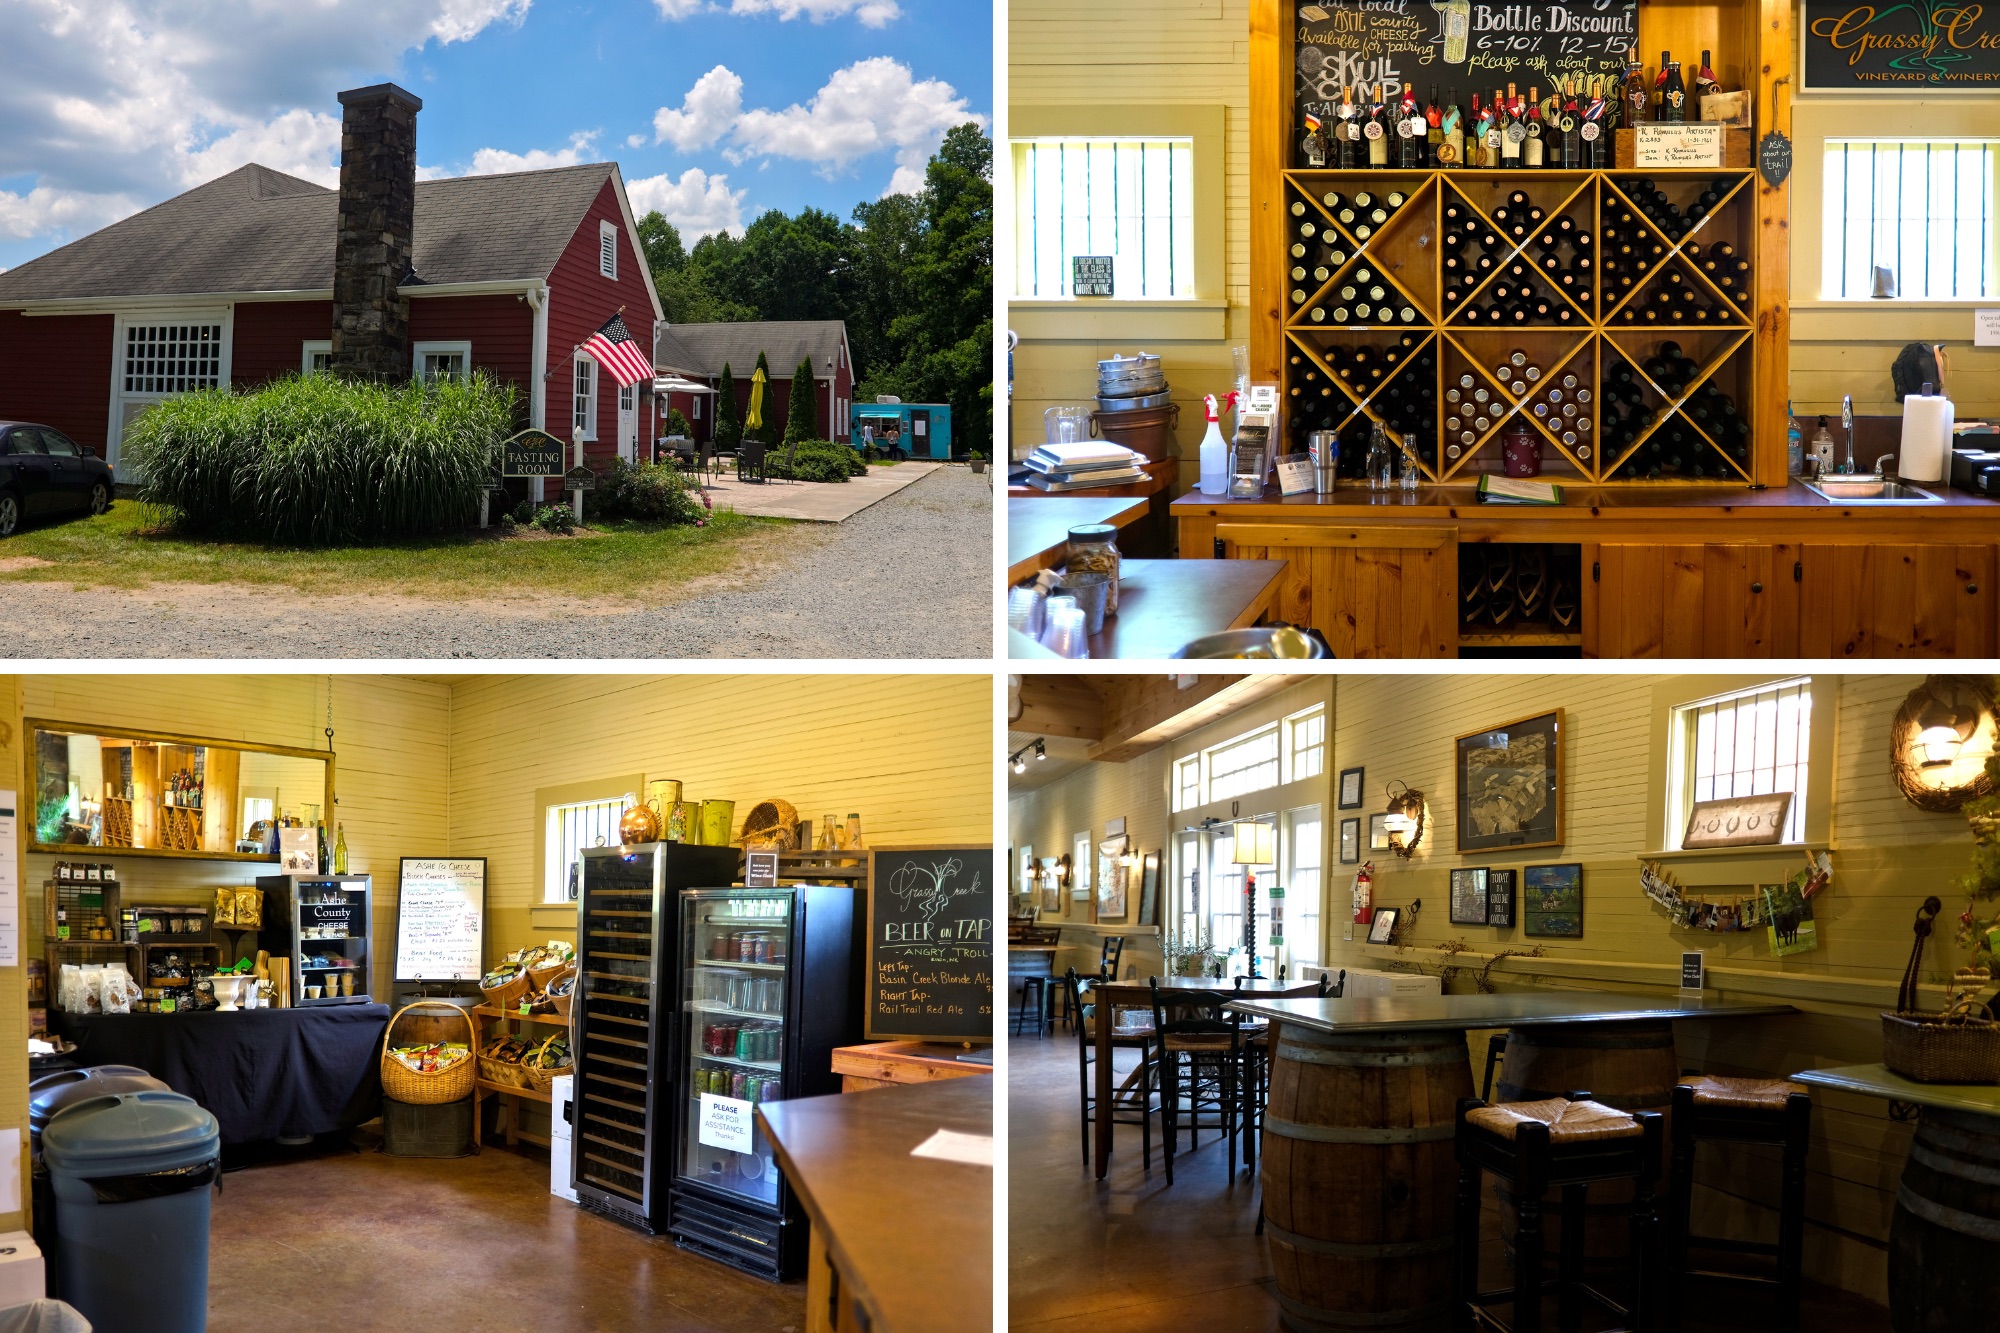 The interior and exterior of Grassy Creek Winery in Elkin